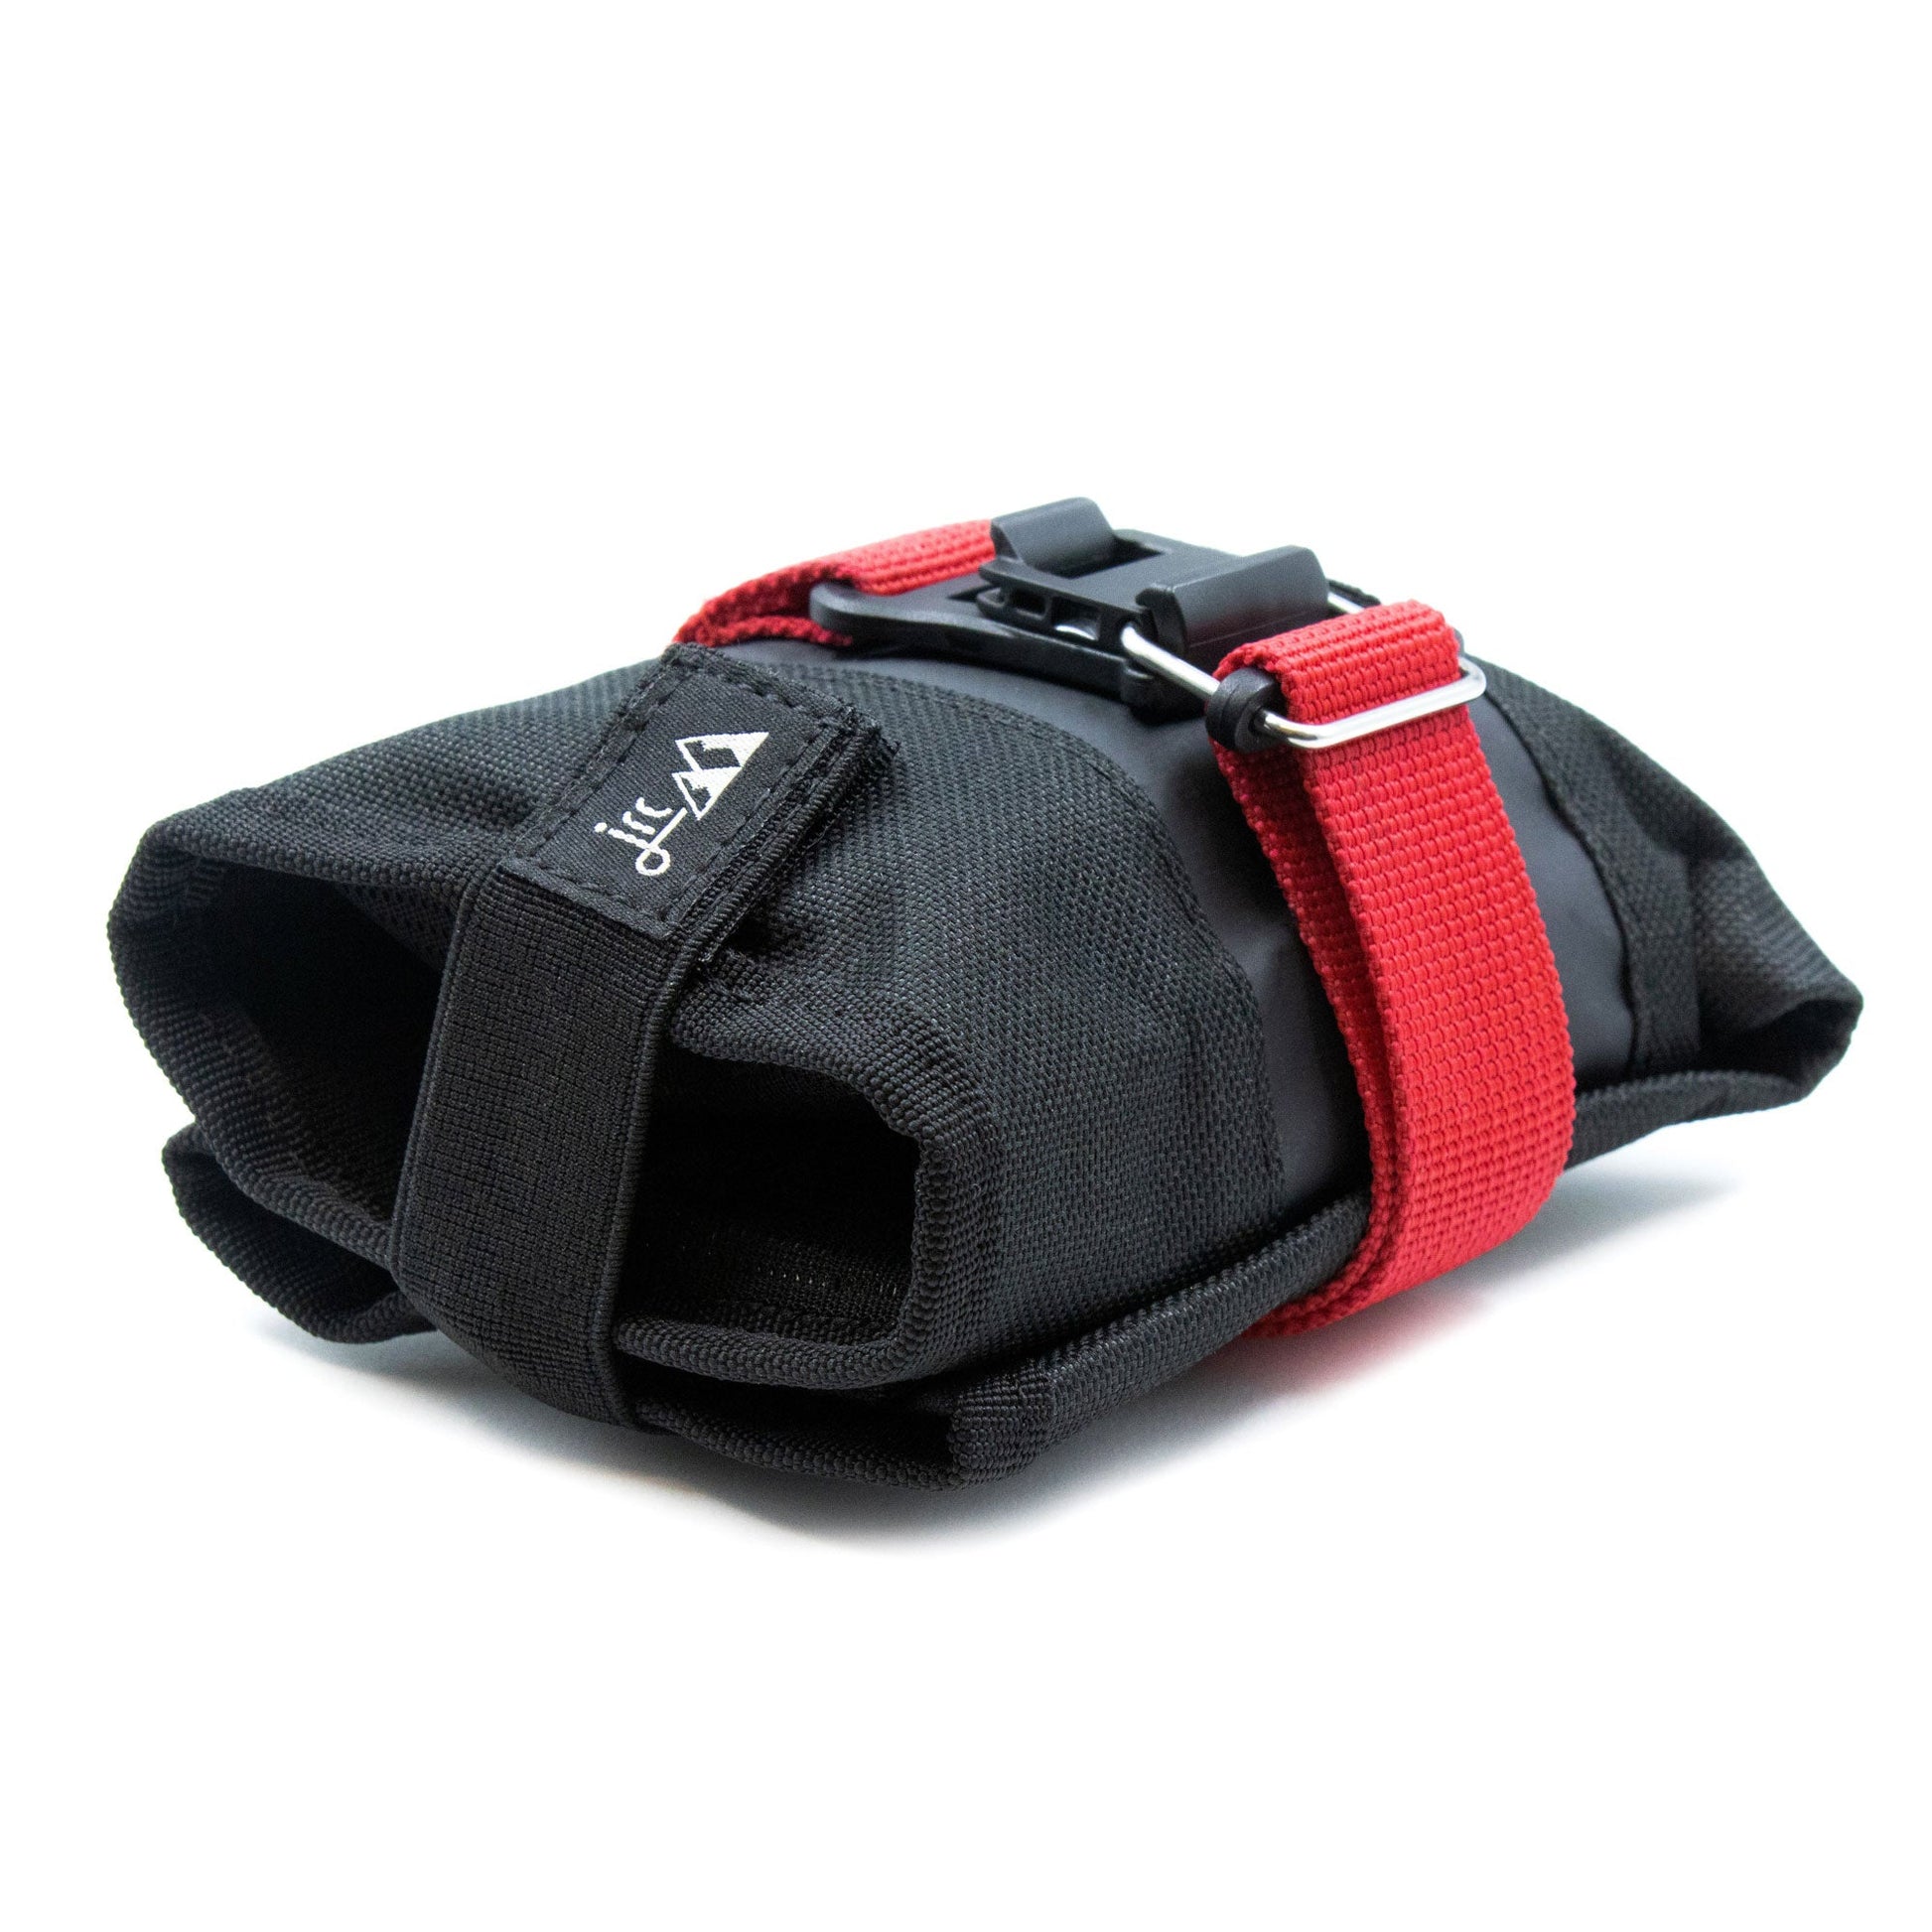 Bicycle saddle roll bag. Compact design with elasticated band and magnetic Fidlock clasp on red strap